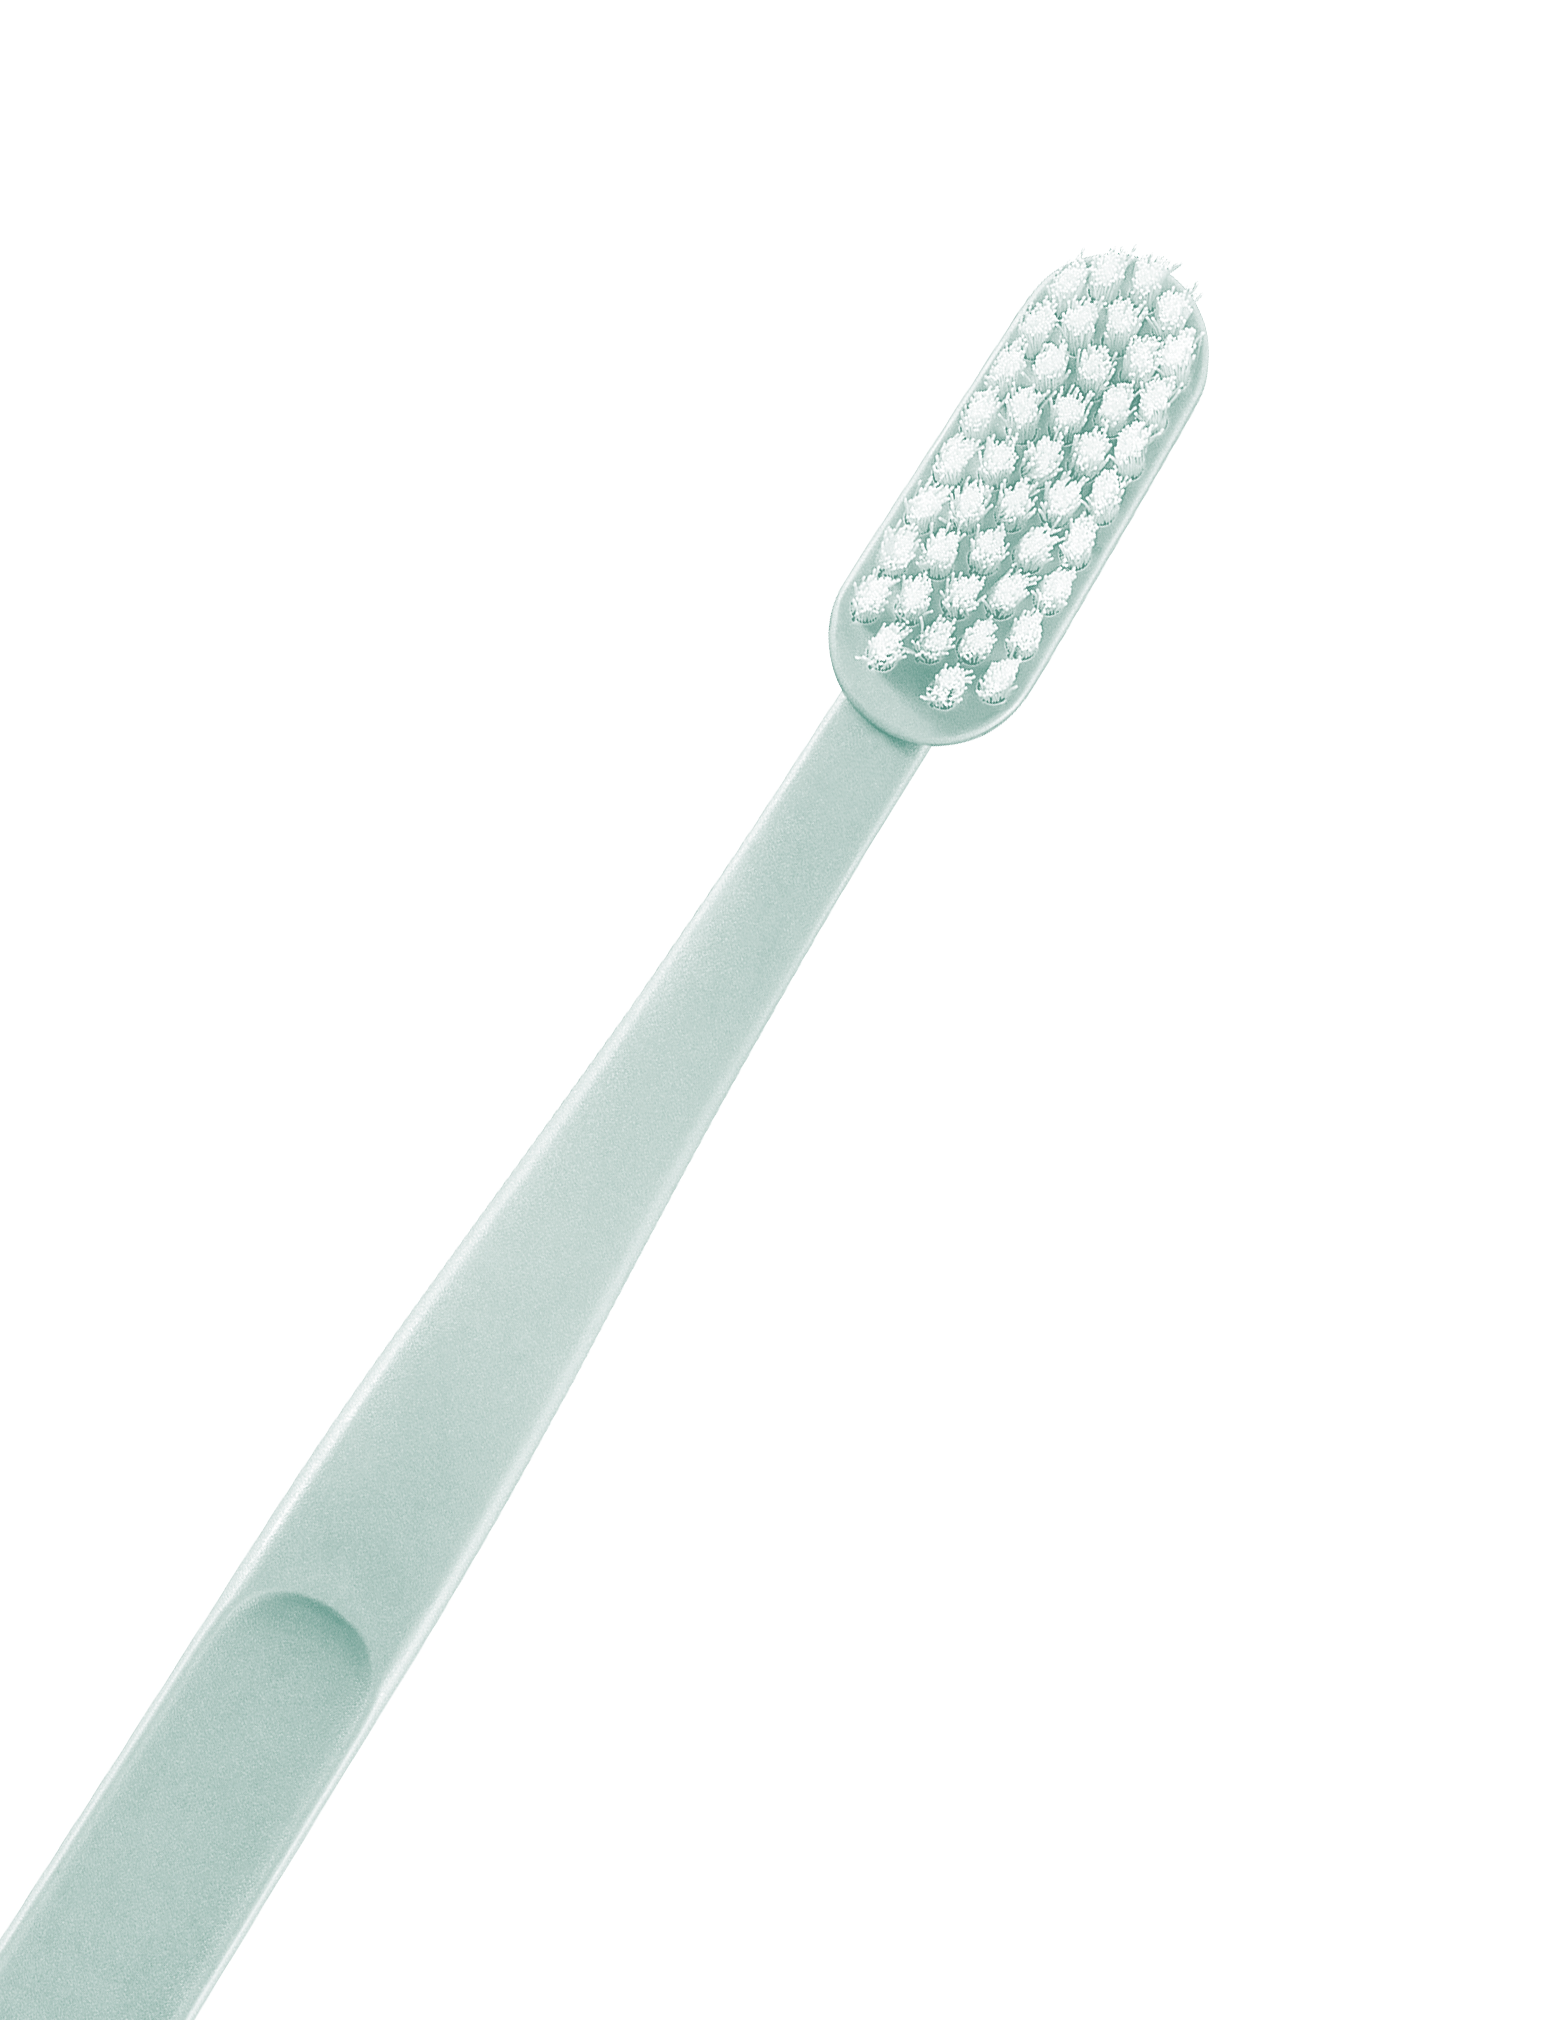 Green Clean Toothbrush